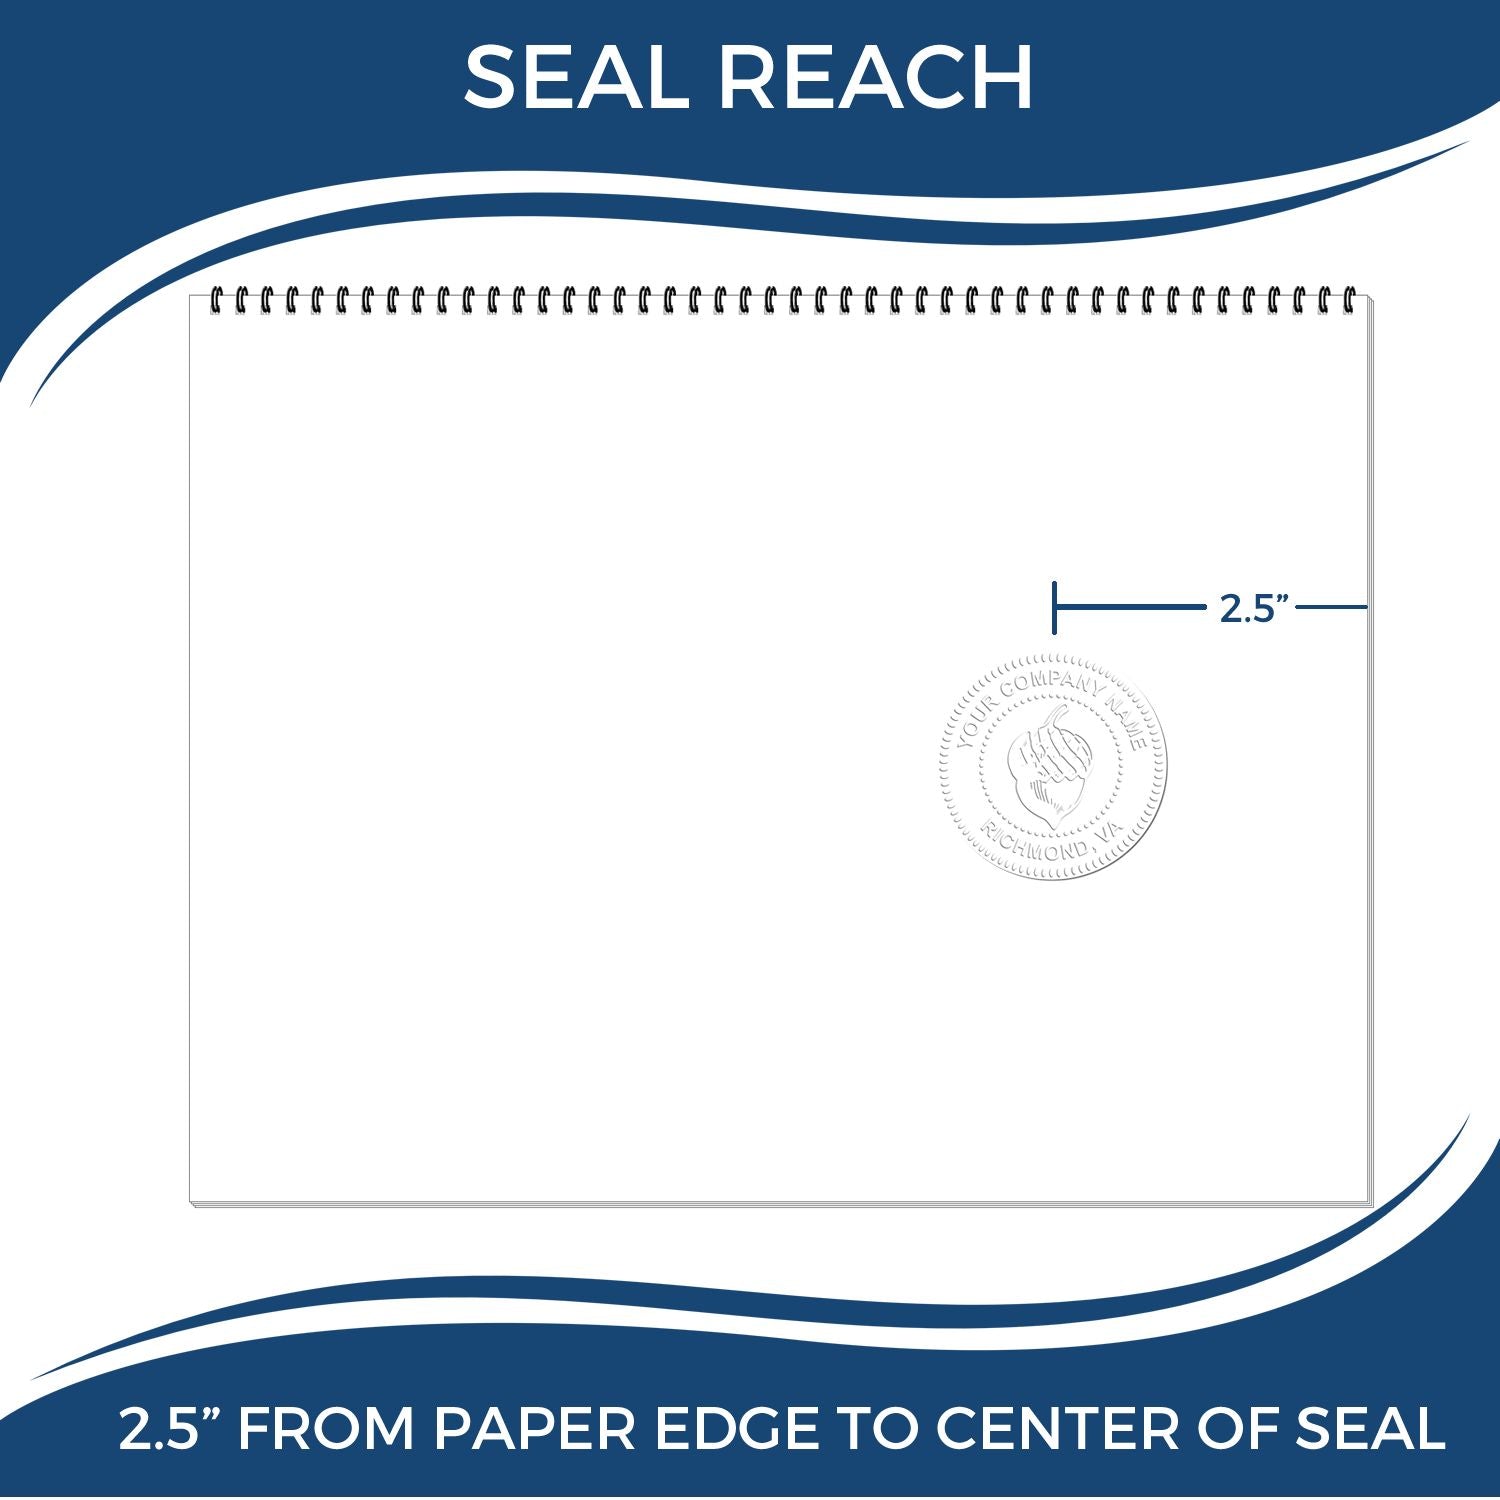 An infographic showing the seal reach which is represented by a ruler and a miniature seal image of the Long Reach New Mexico Land Surveyor Seal